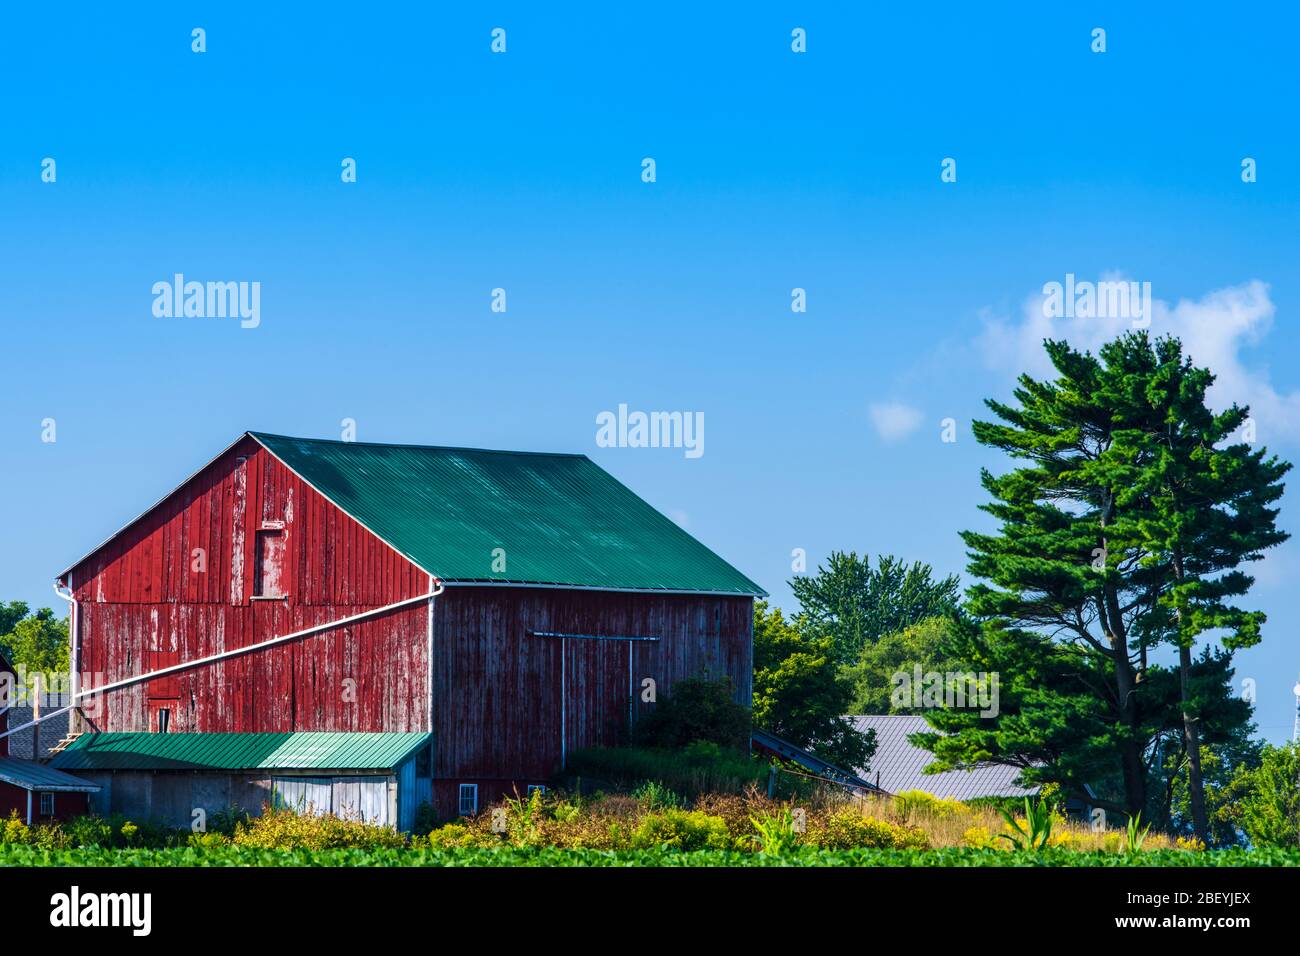 Rural scene with crops and red barn, Dutton, Ontario, Canada Stock Photo